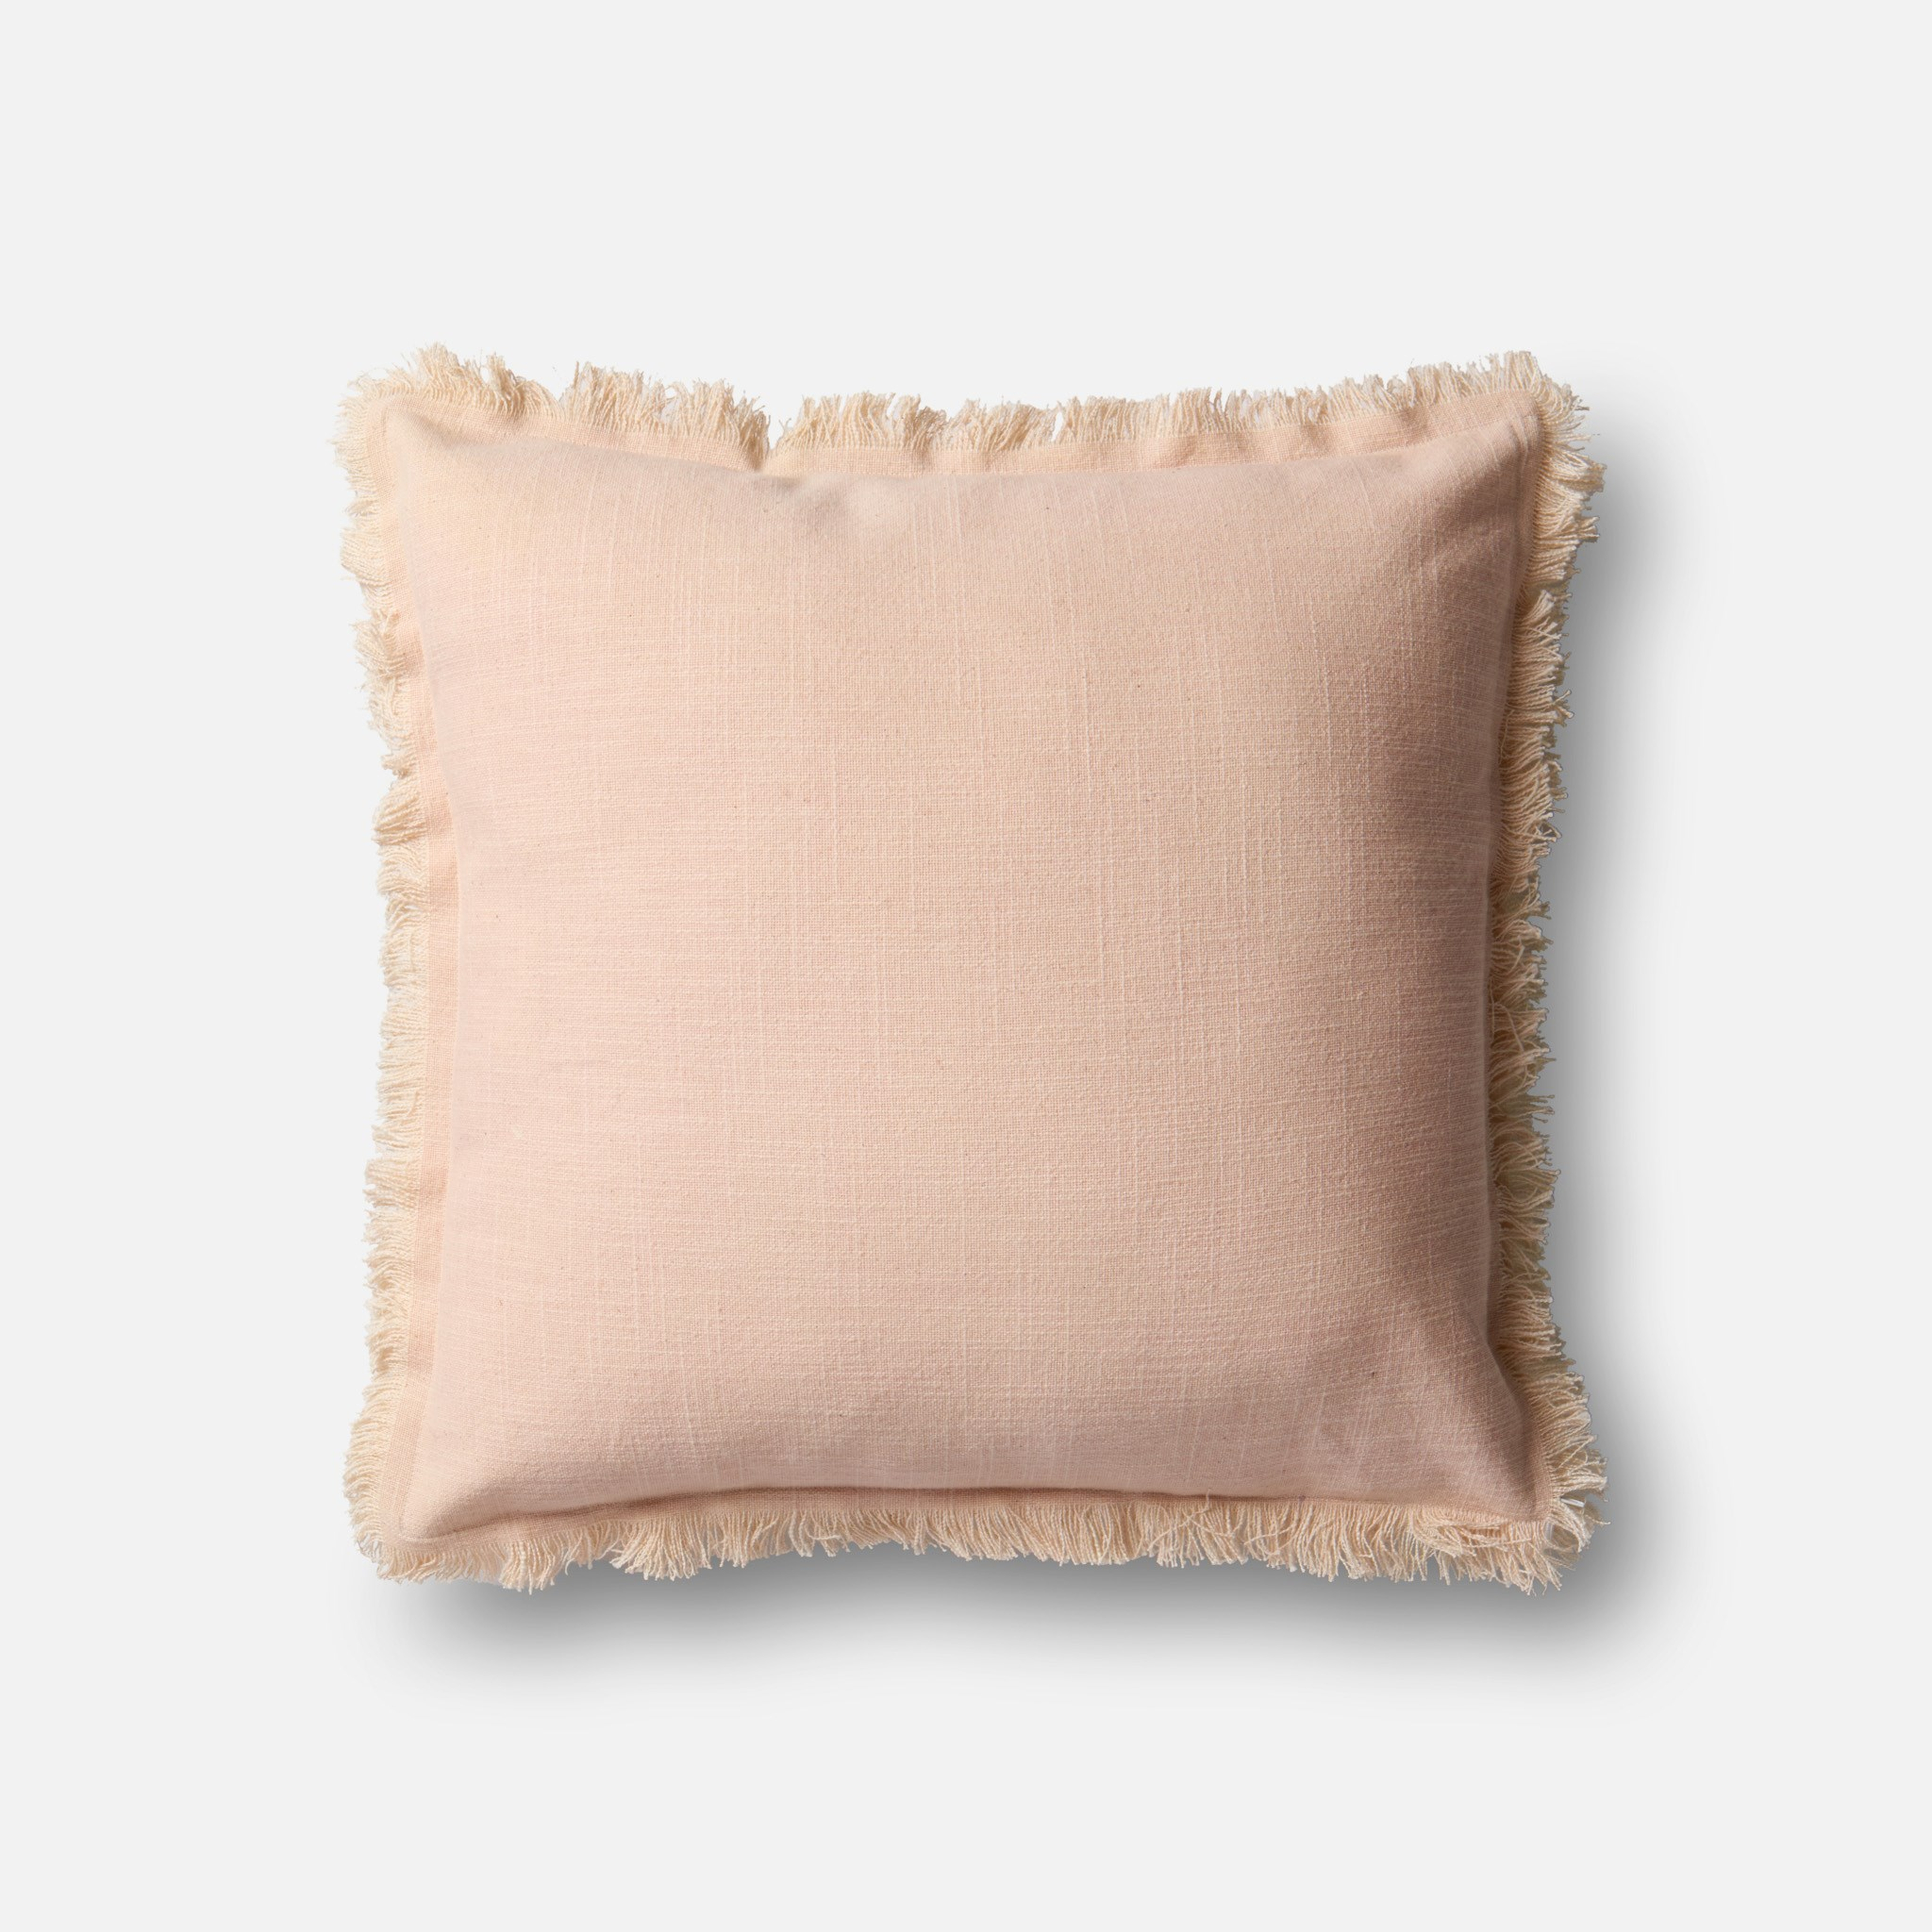 PILLOWS - PINK / BEIGE - Loloi Rugs